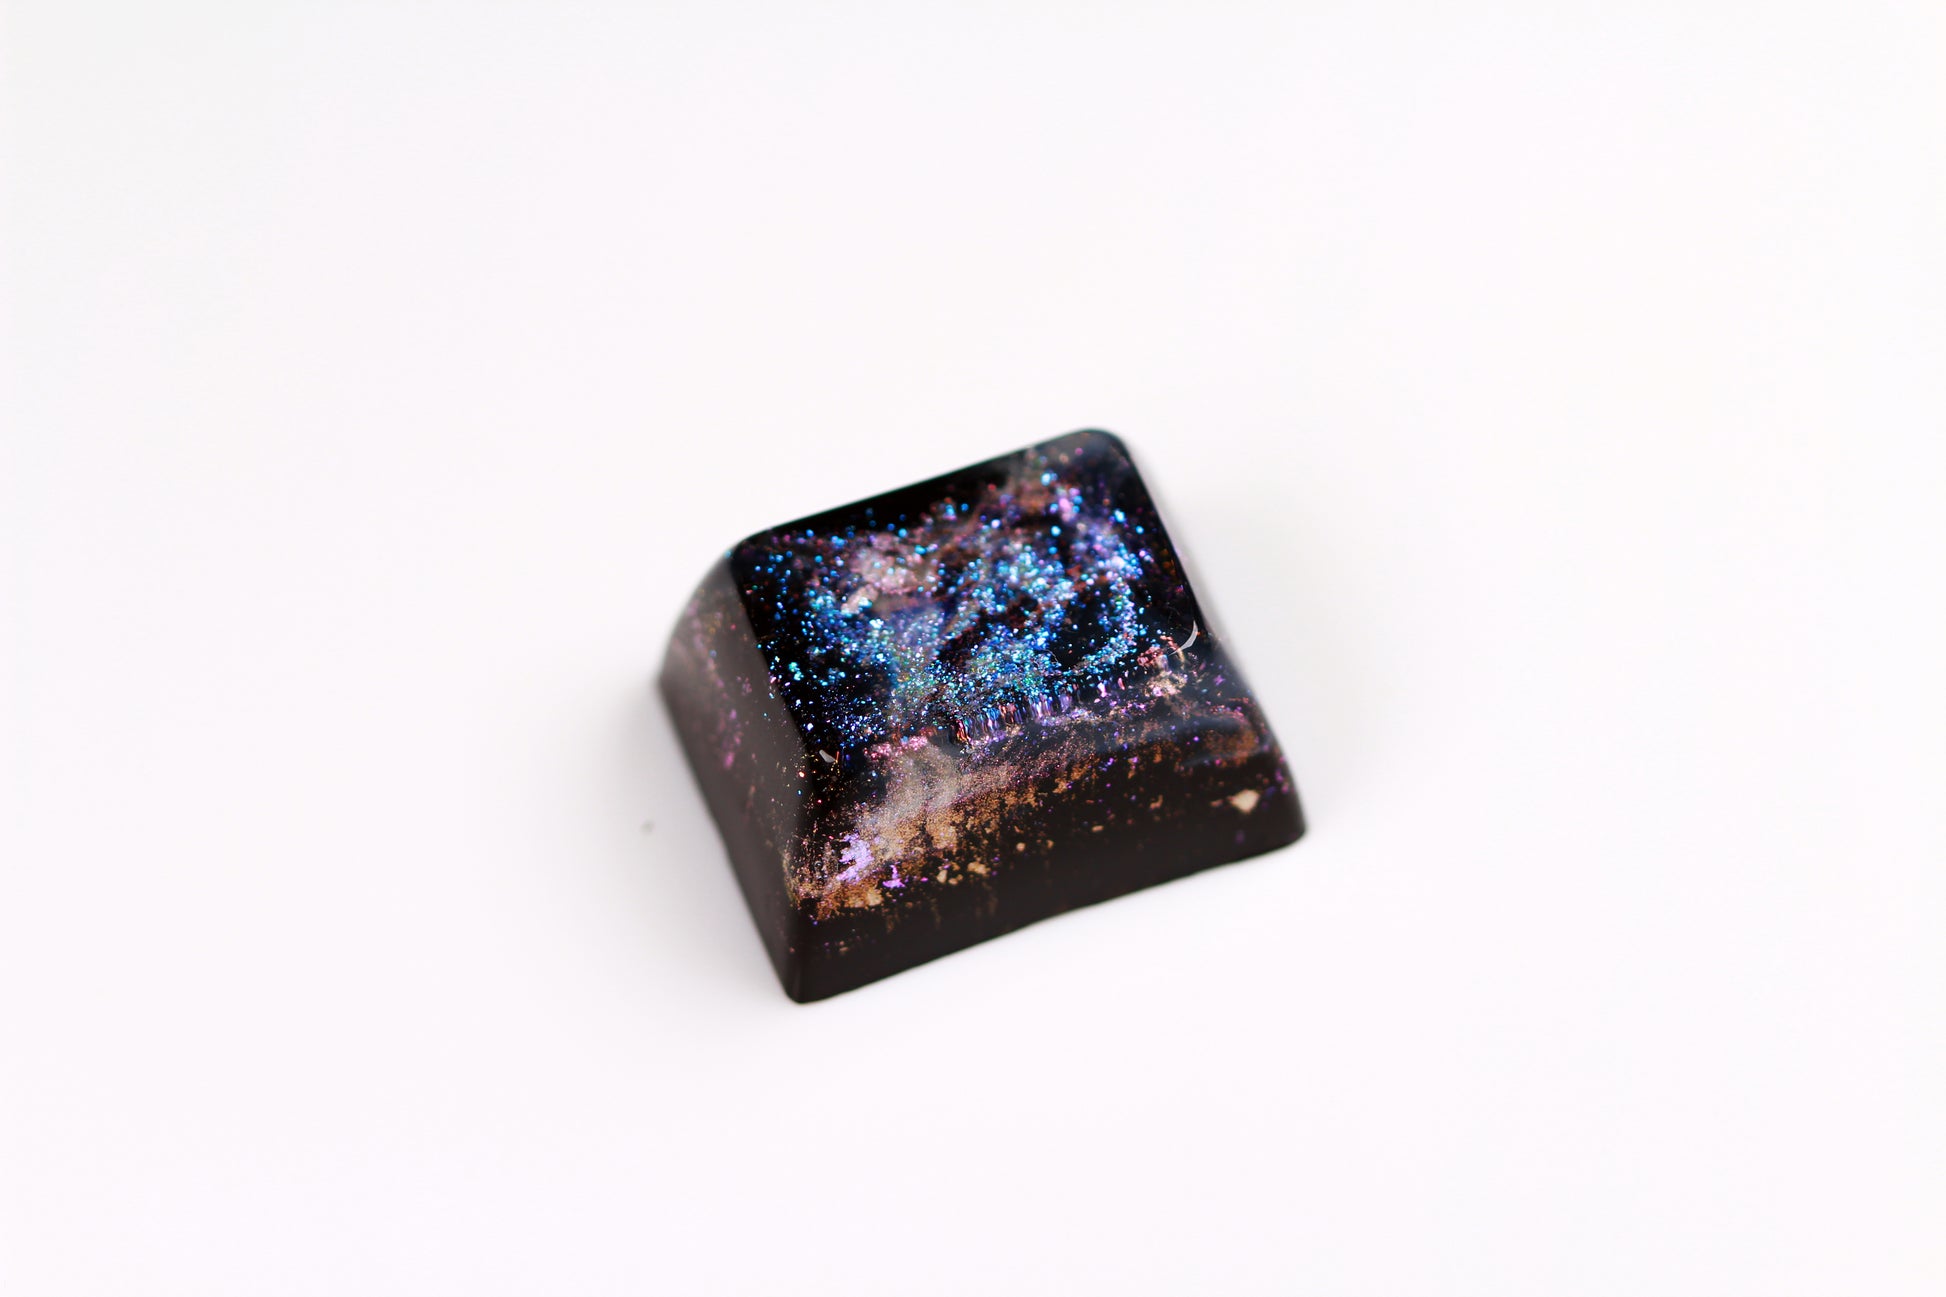 Gimpy SA Row 3, 1.25u - Deep Field Particle Stream 6 - PrimeCaps Keycap - Blank and Sculpted Artisan Keycaps for cherry MX mechanical keyboards 